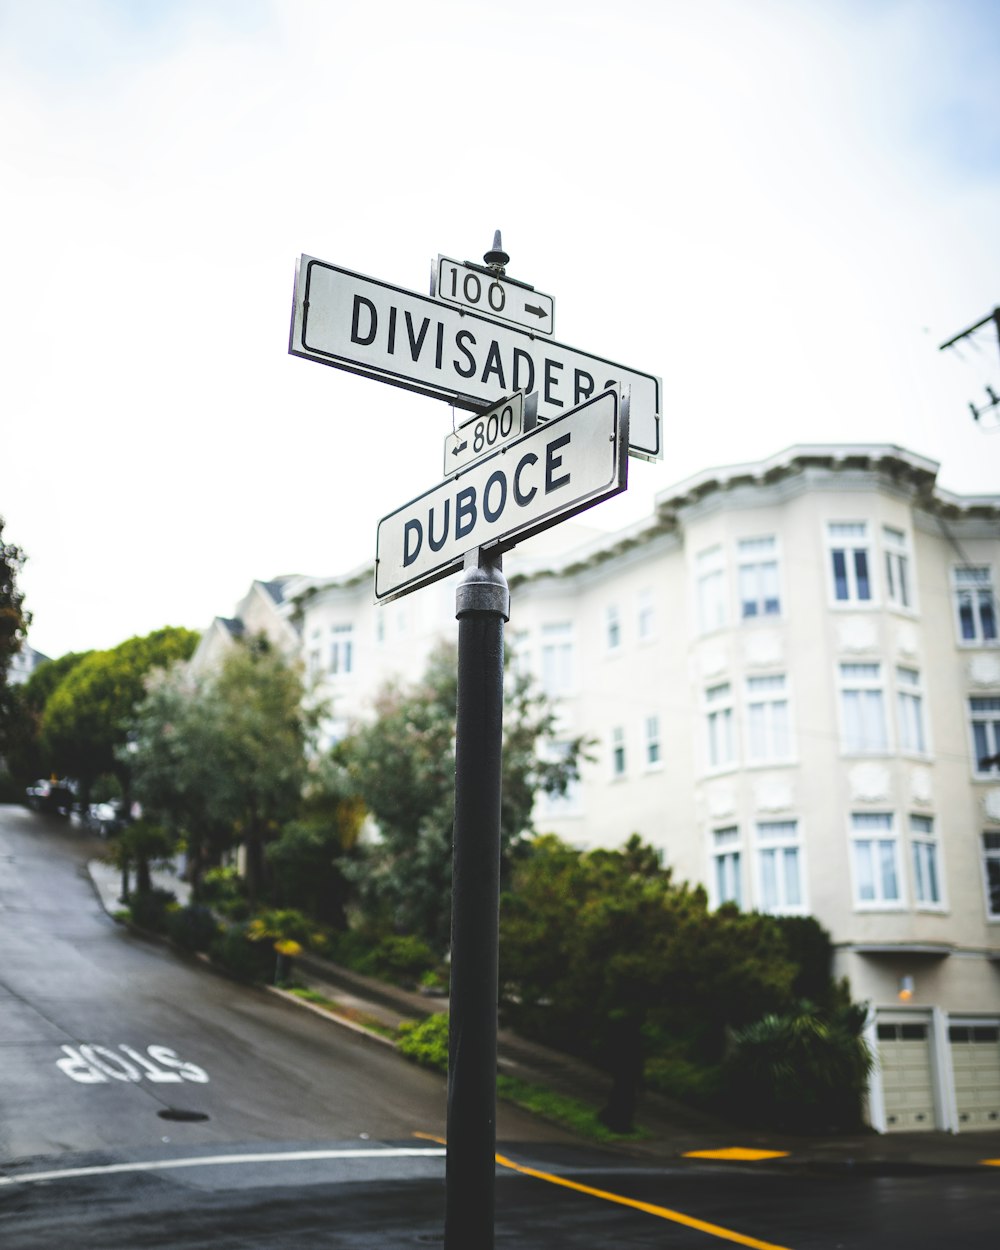 road signage of Divisaders and Duboce